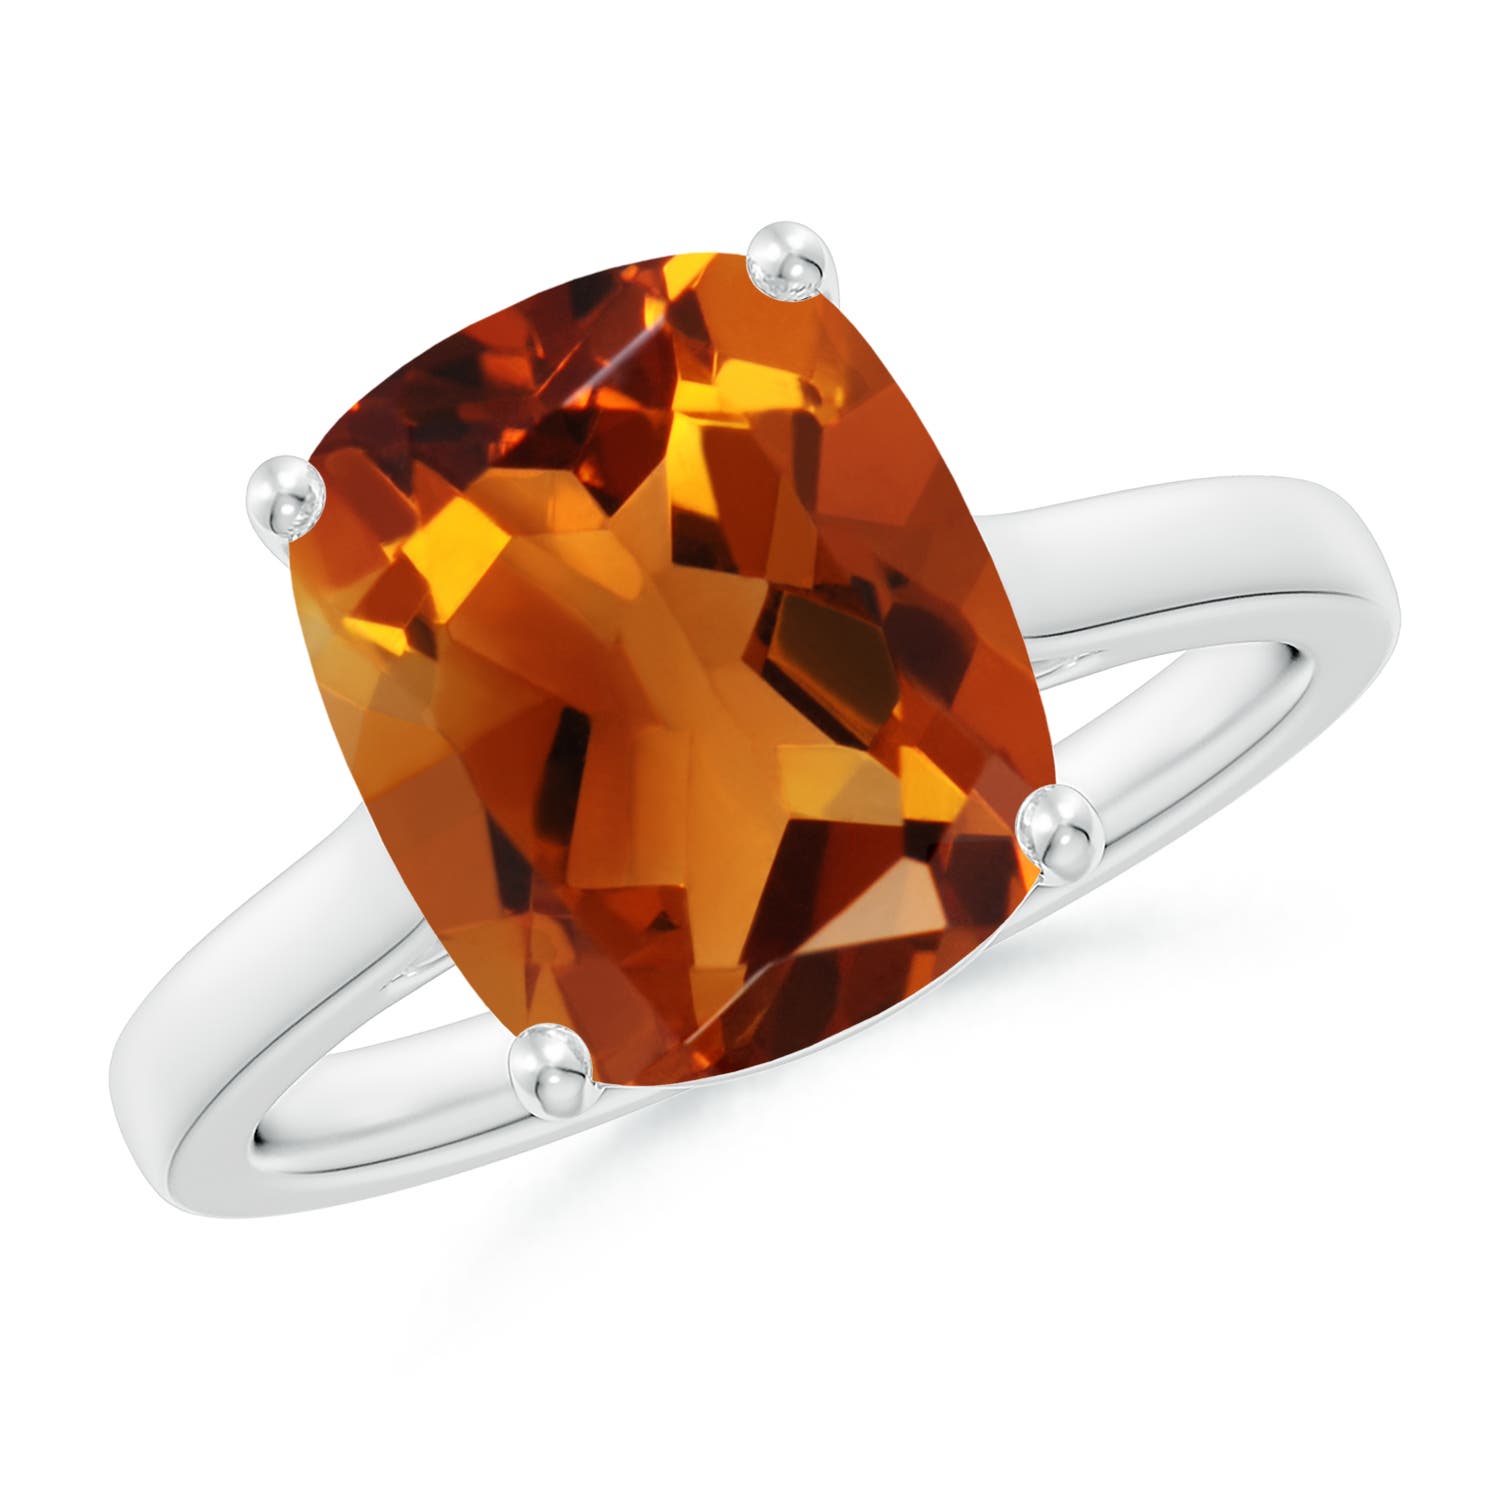 AAAA - Citrine / 3.73 CT / 14 KT White Gold